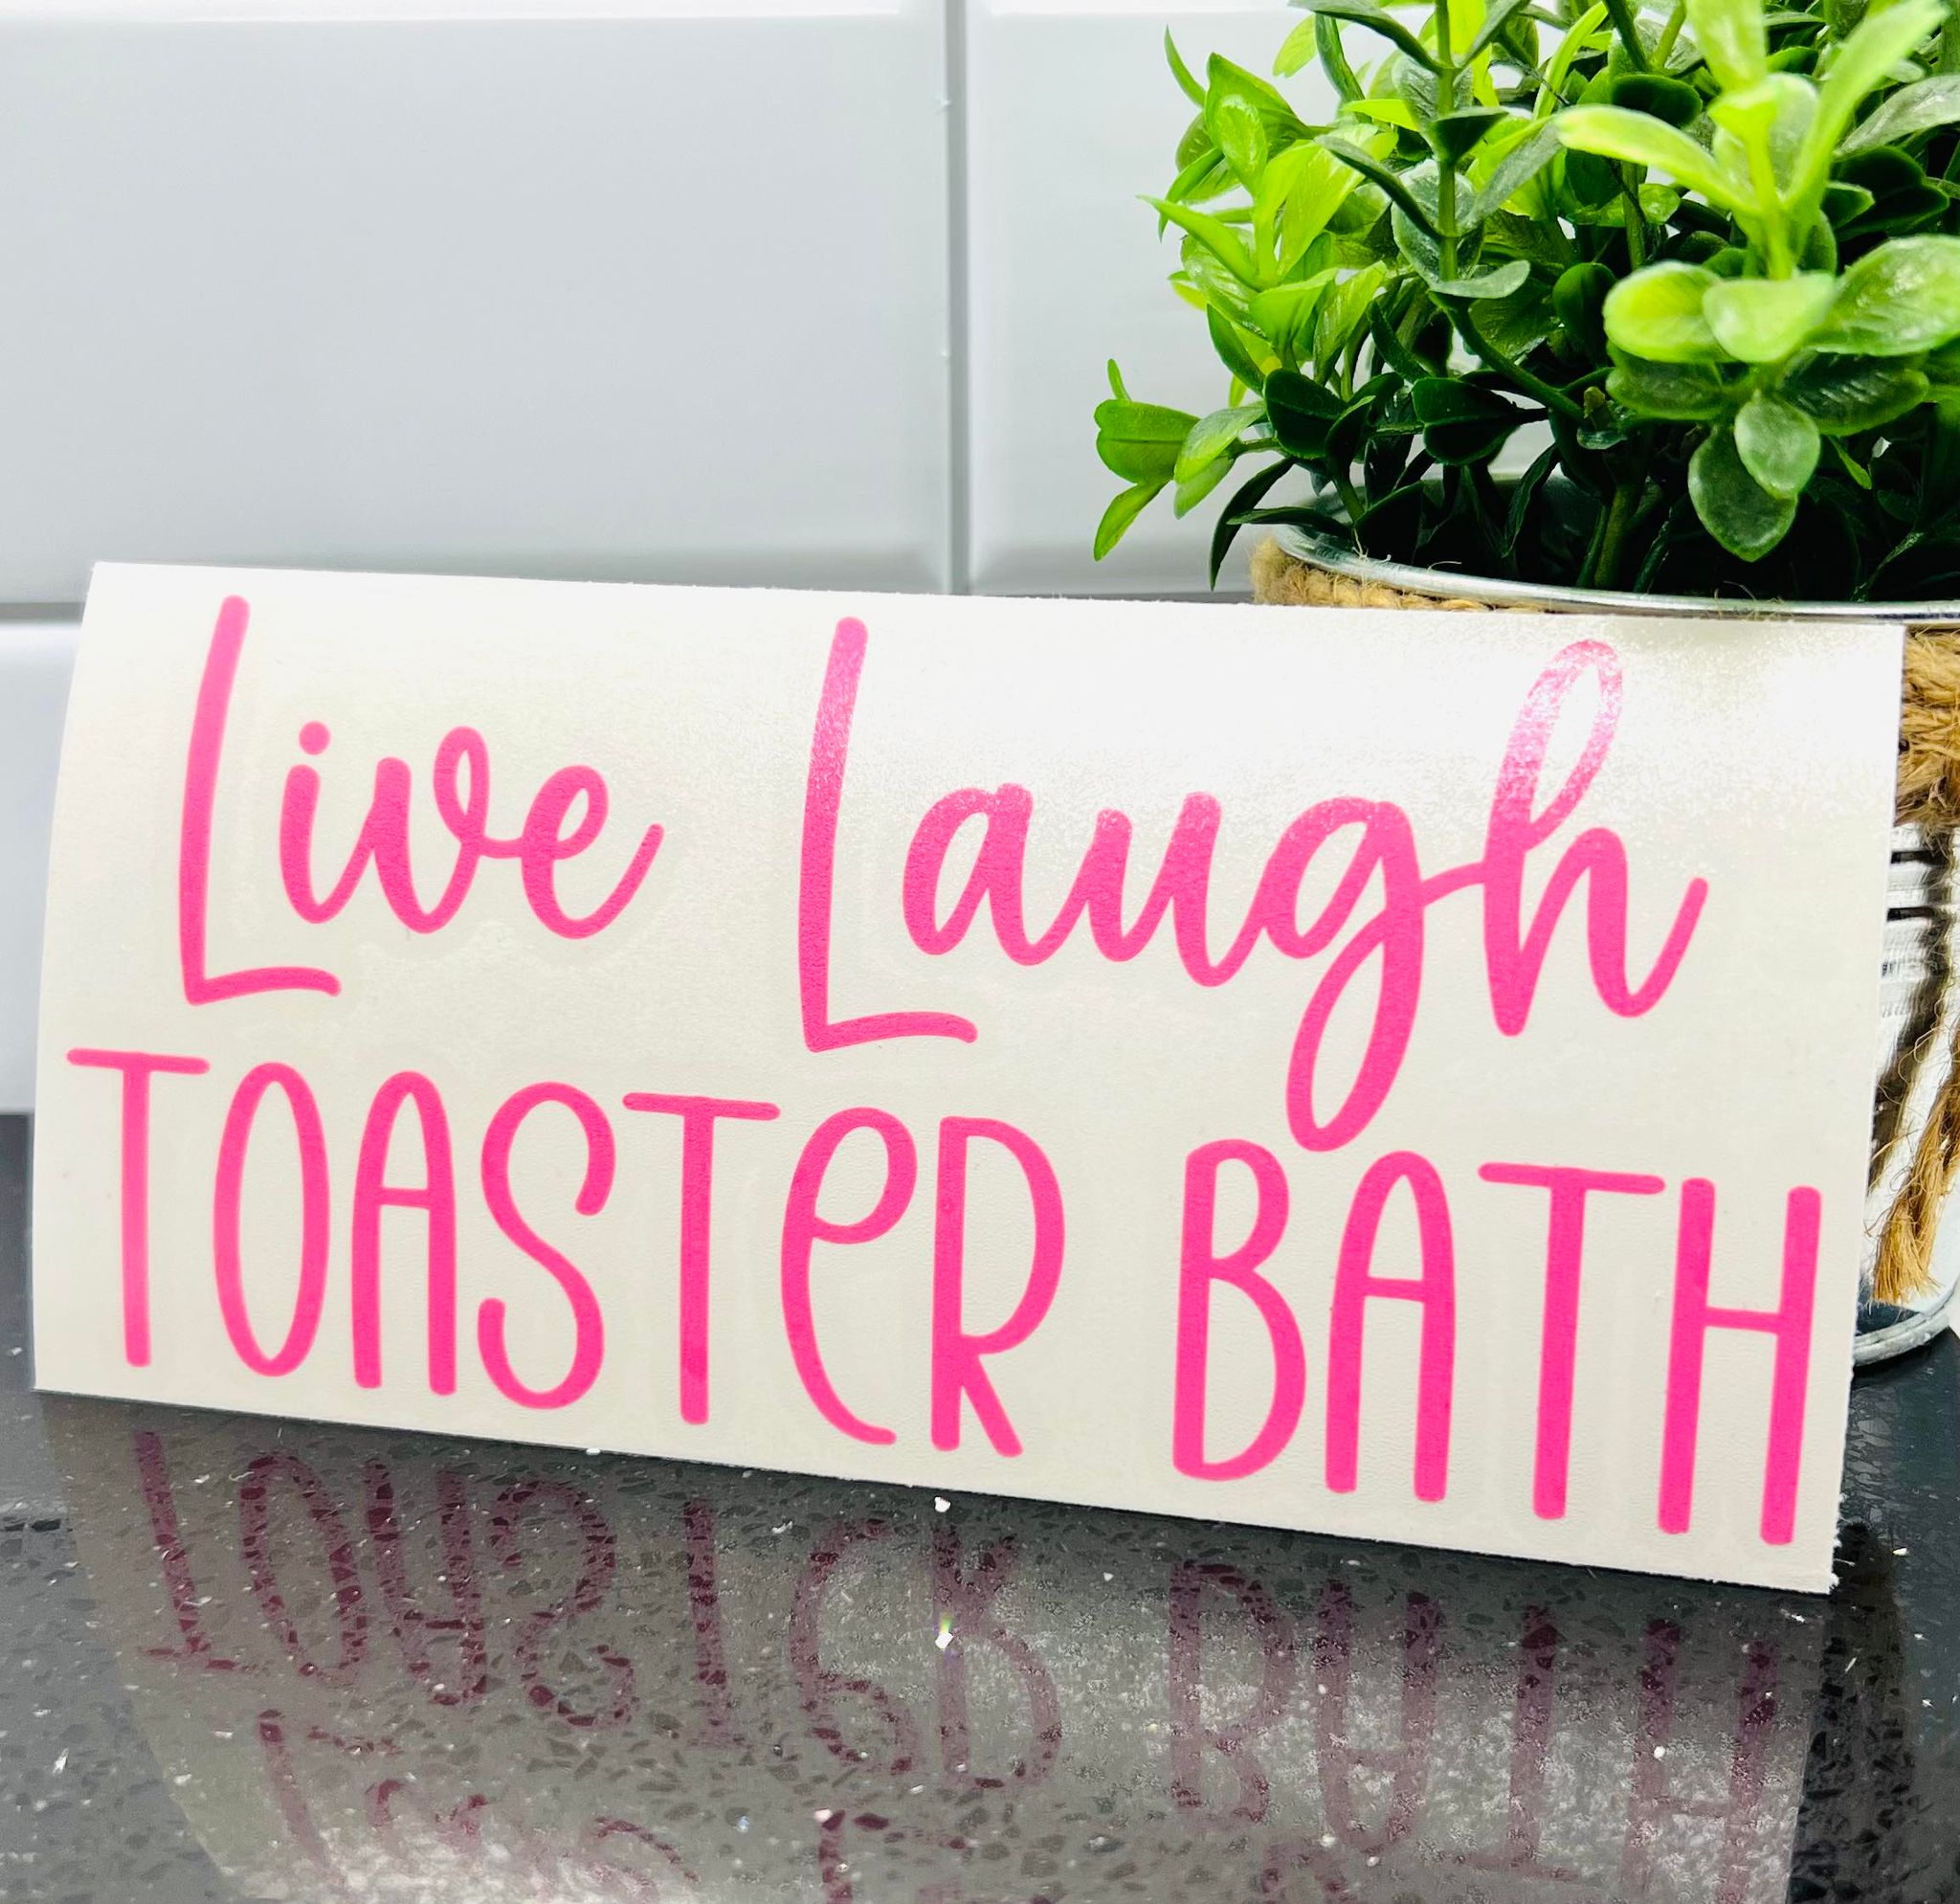 Live Laugh Toaster Bath Decal